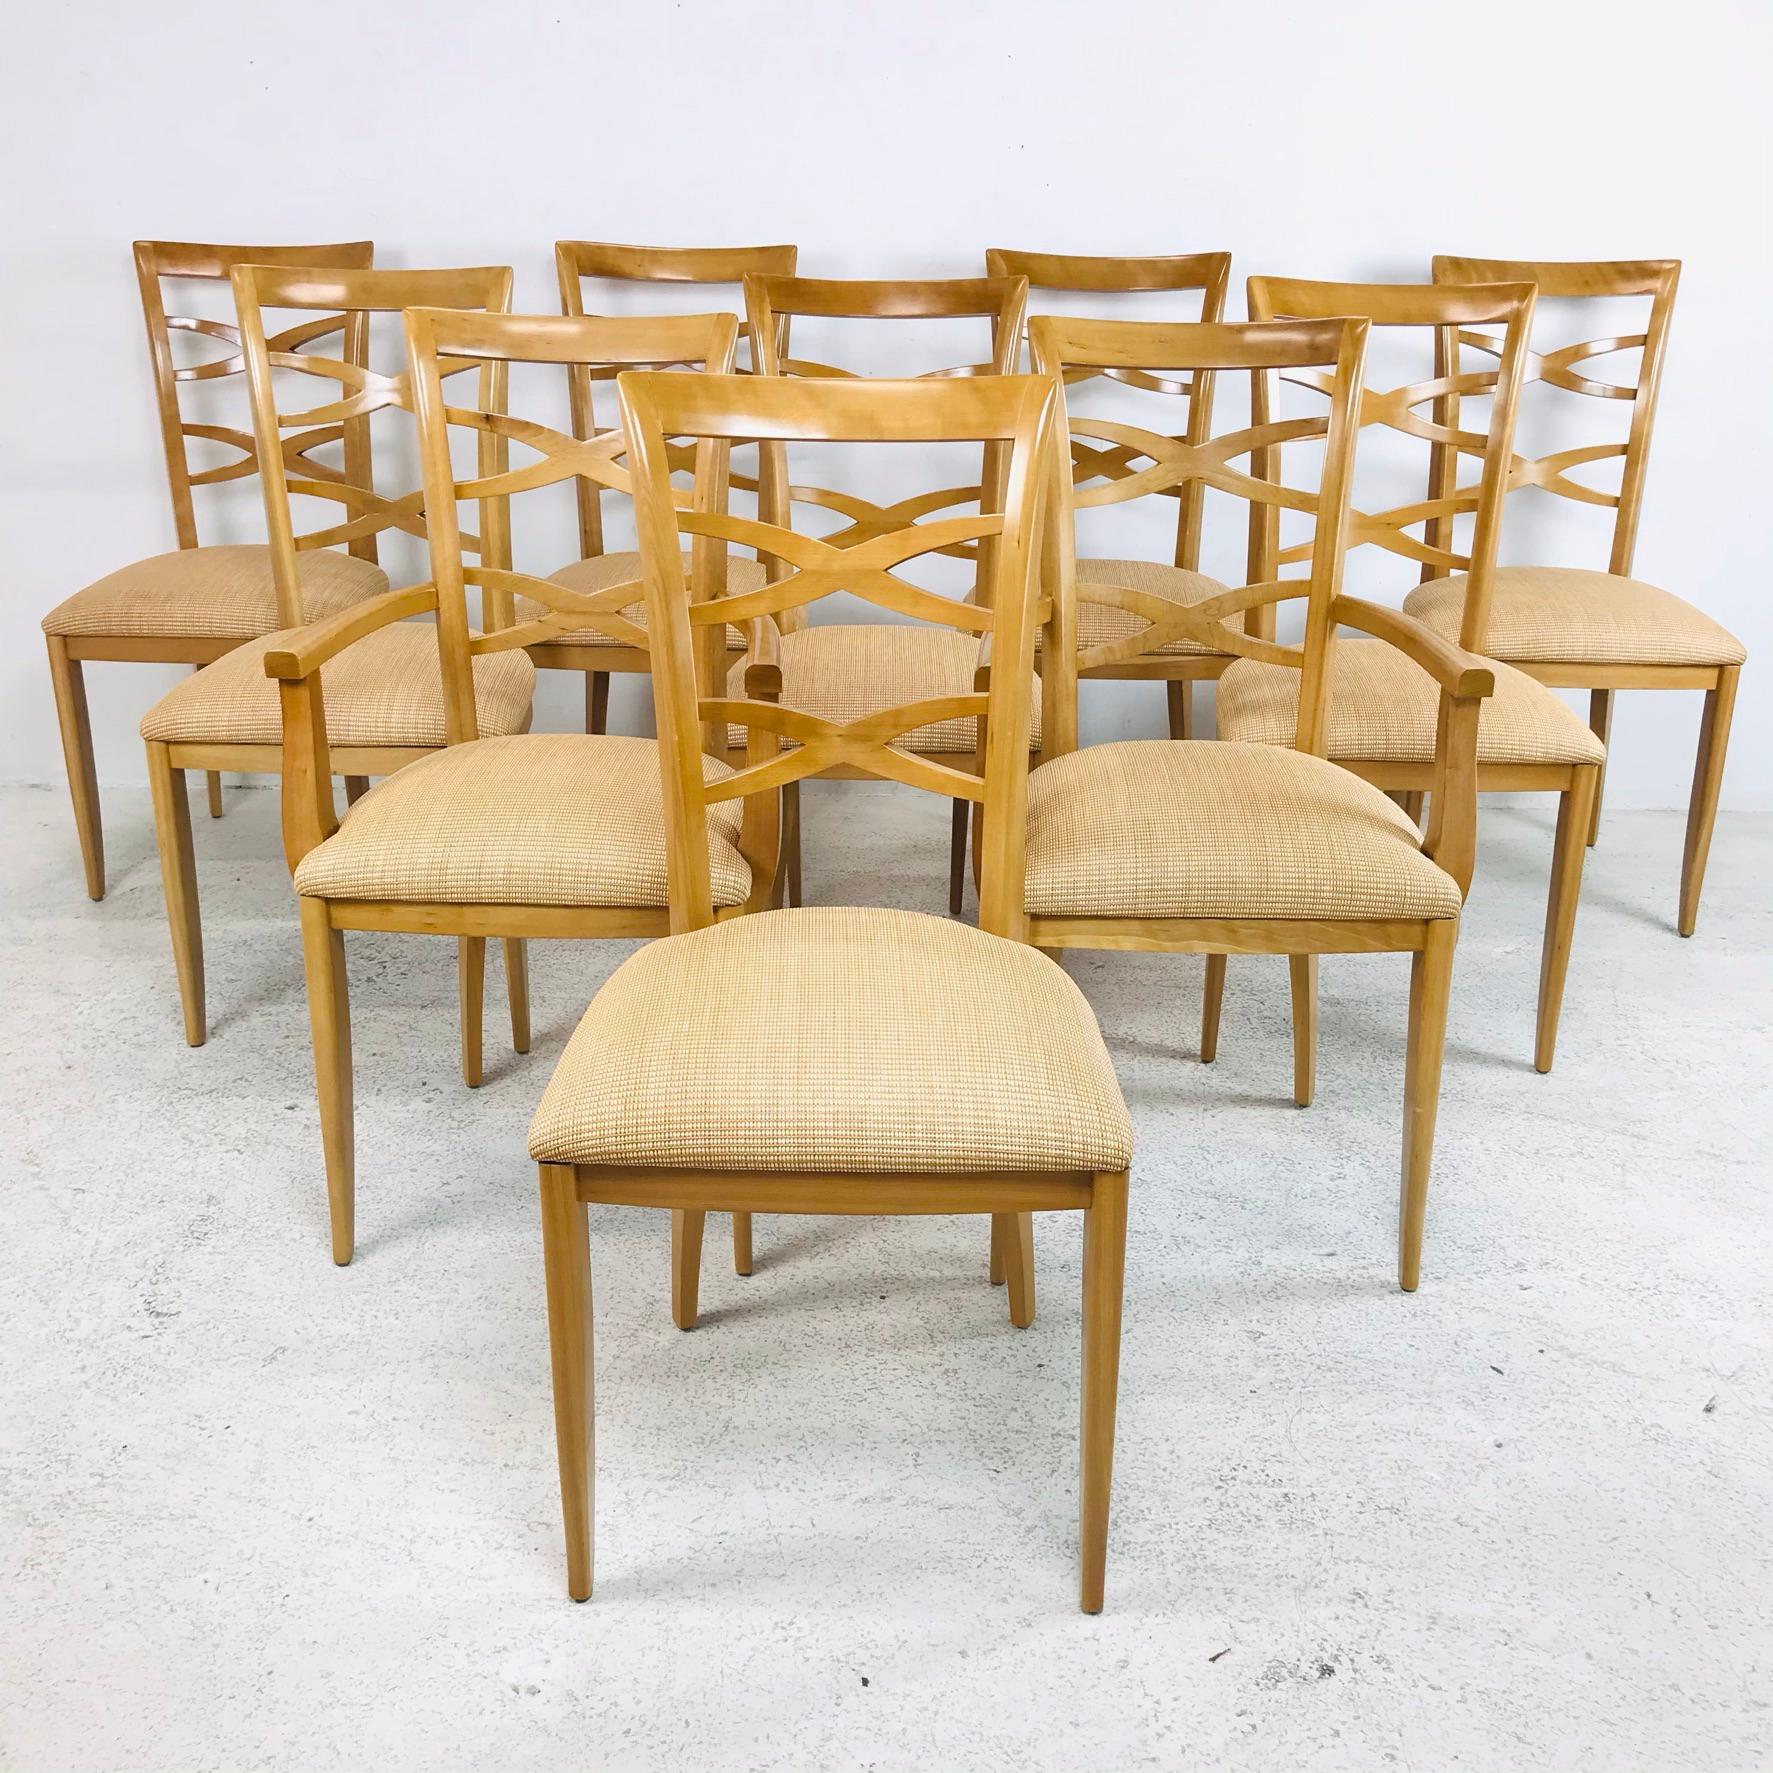 Set of 10 custom dining chairs. 2 armchairs and 8 side chairs.